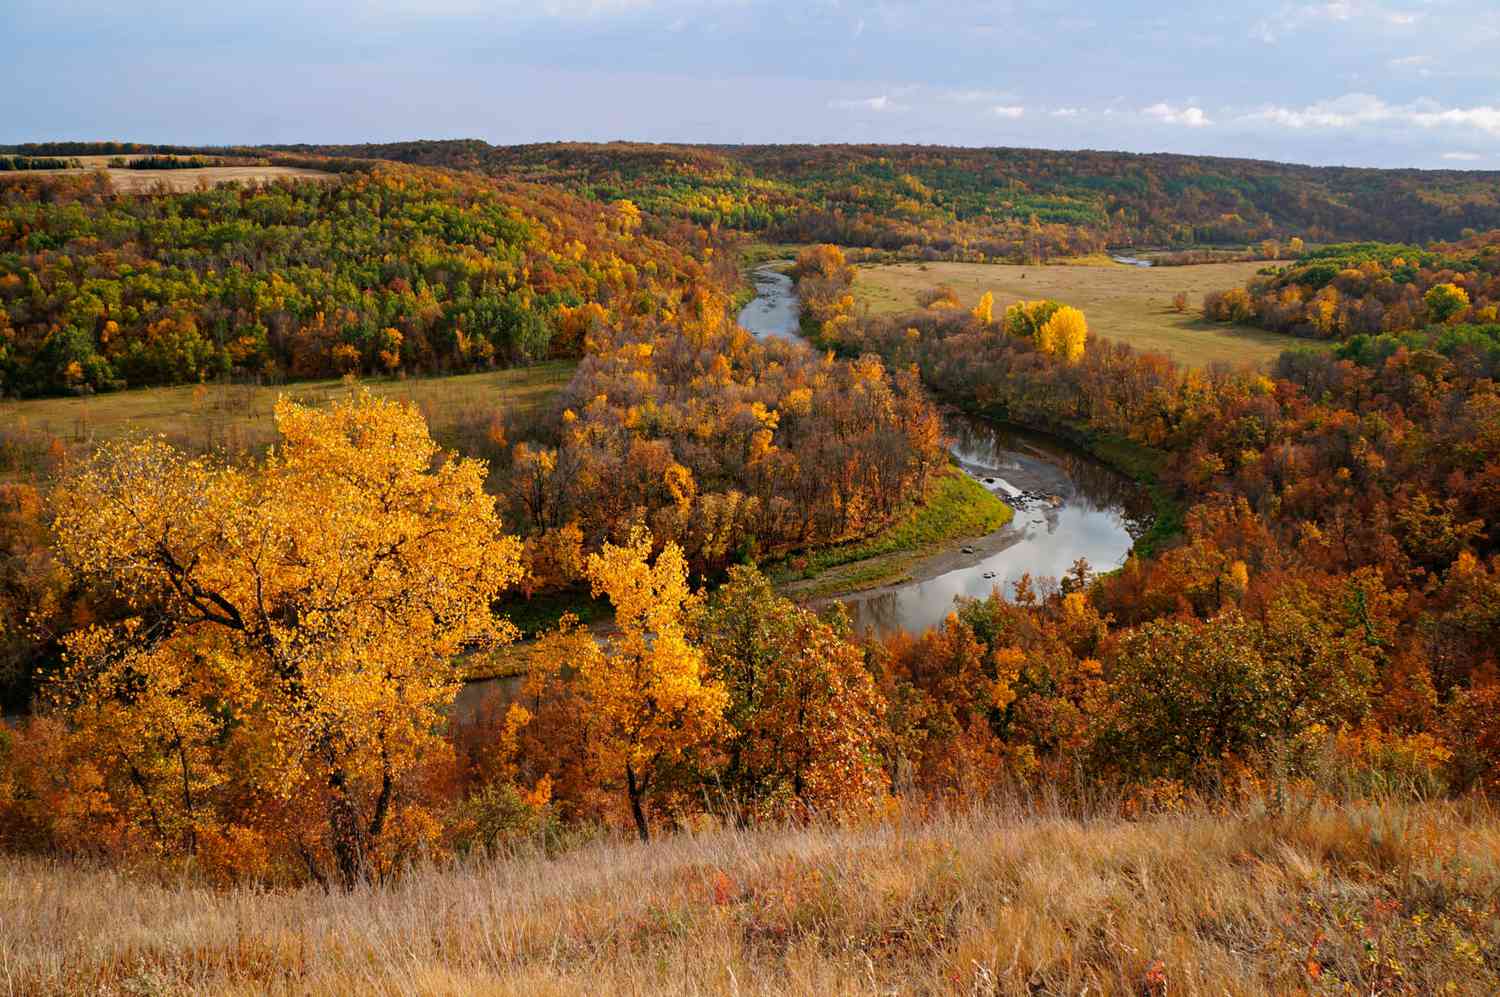 15-facts-about-local-wildlife-and-natural-reserves-in-fargo-north-dakota